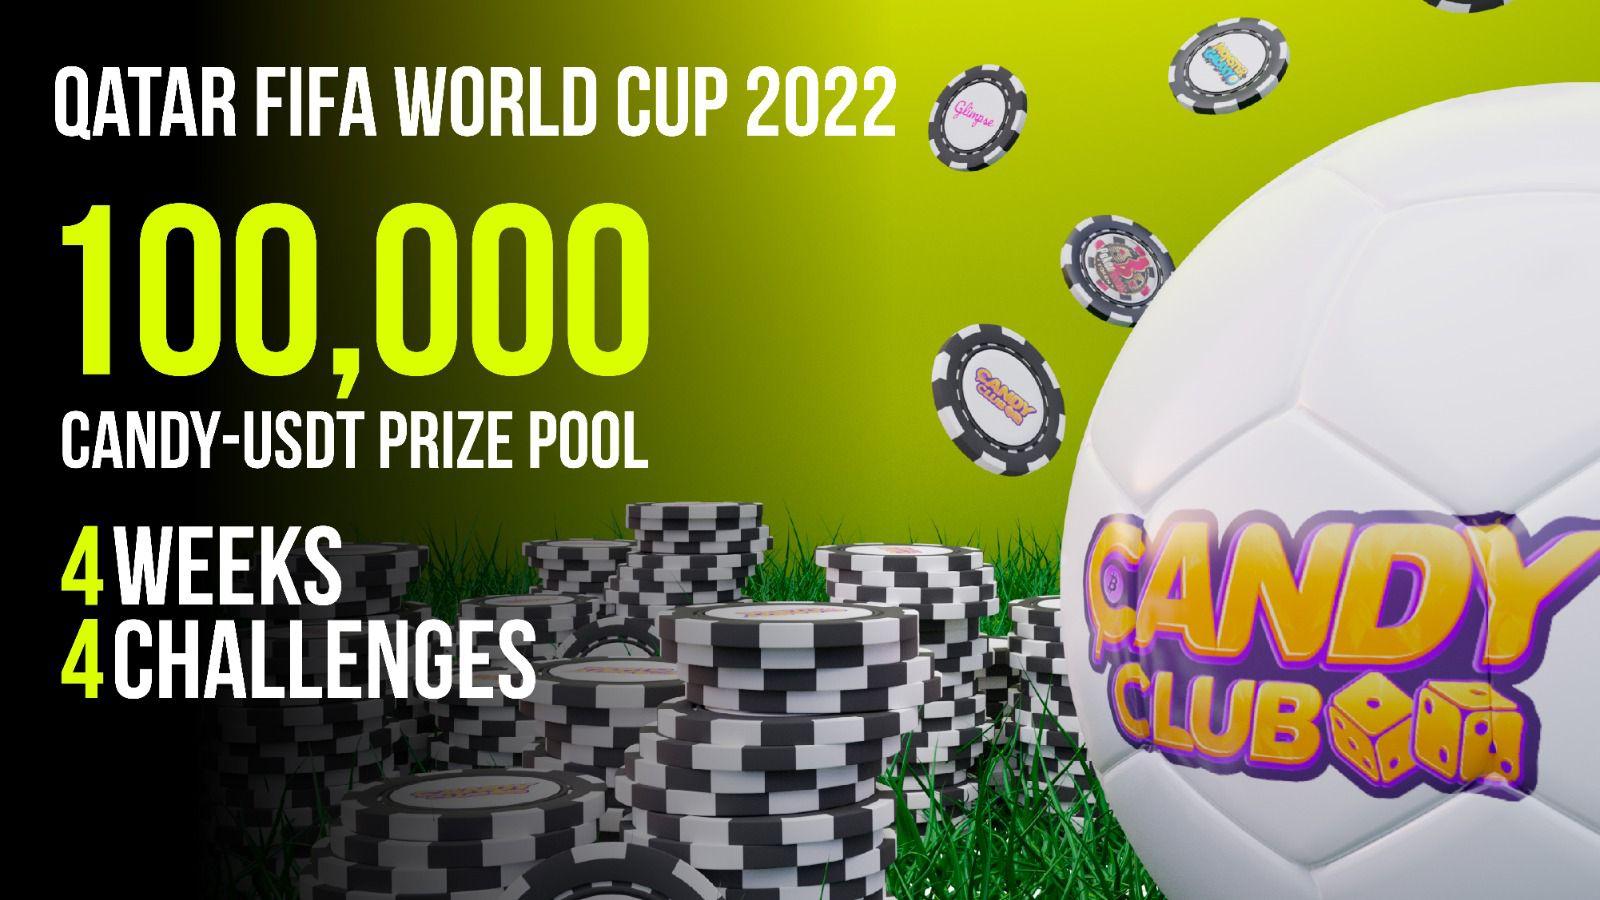 Candy Club Offers 100,000 Candy-USDT Reward for World Cup Celebration – Blockchain News, Opinion, TV and Jobs